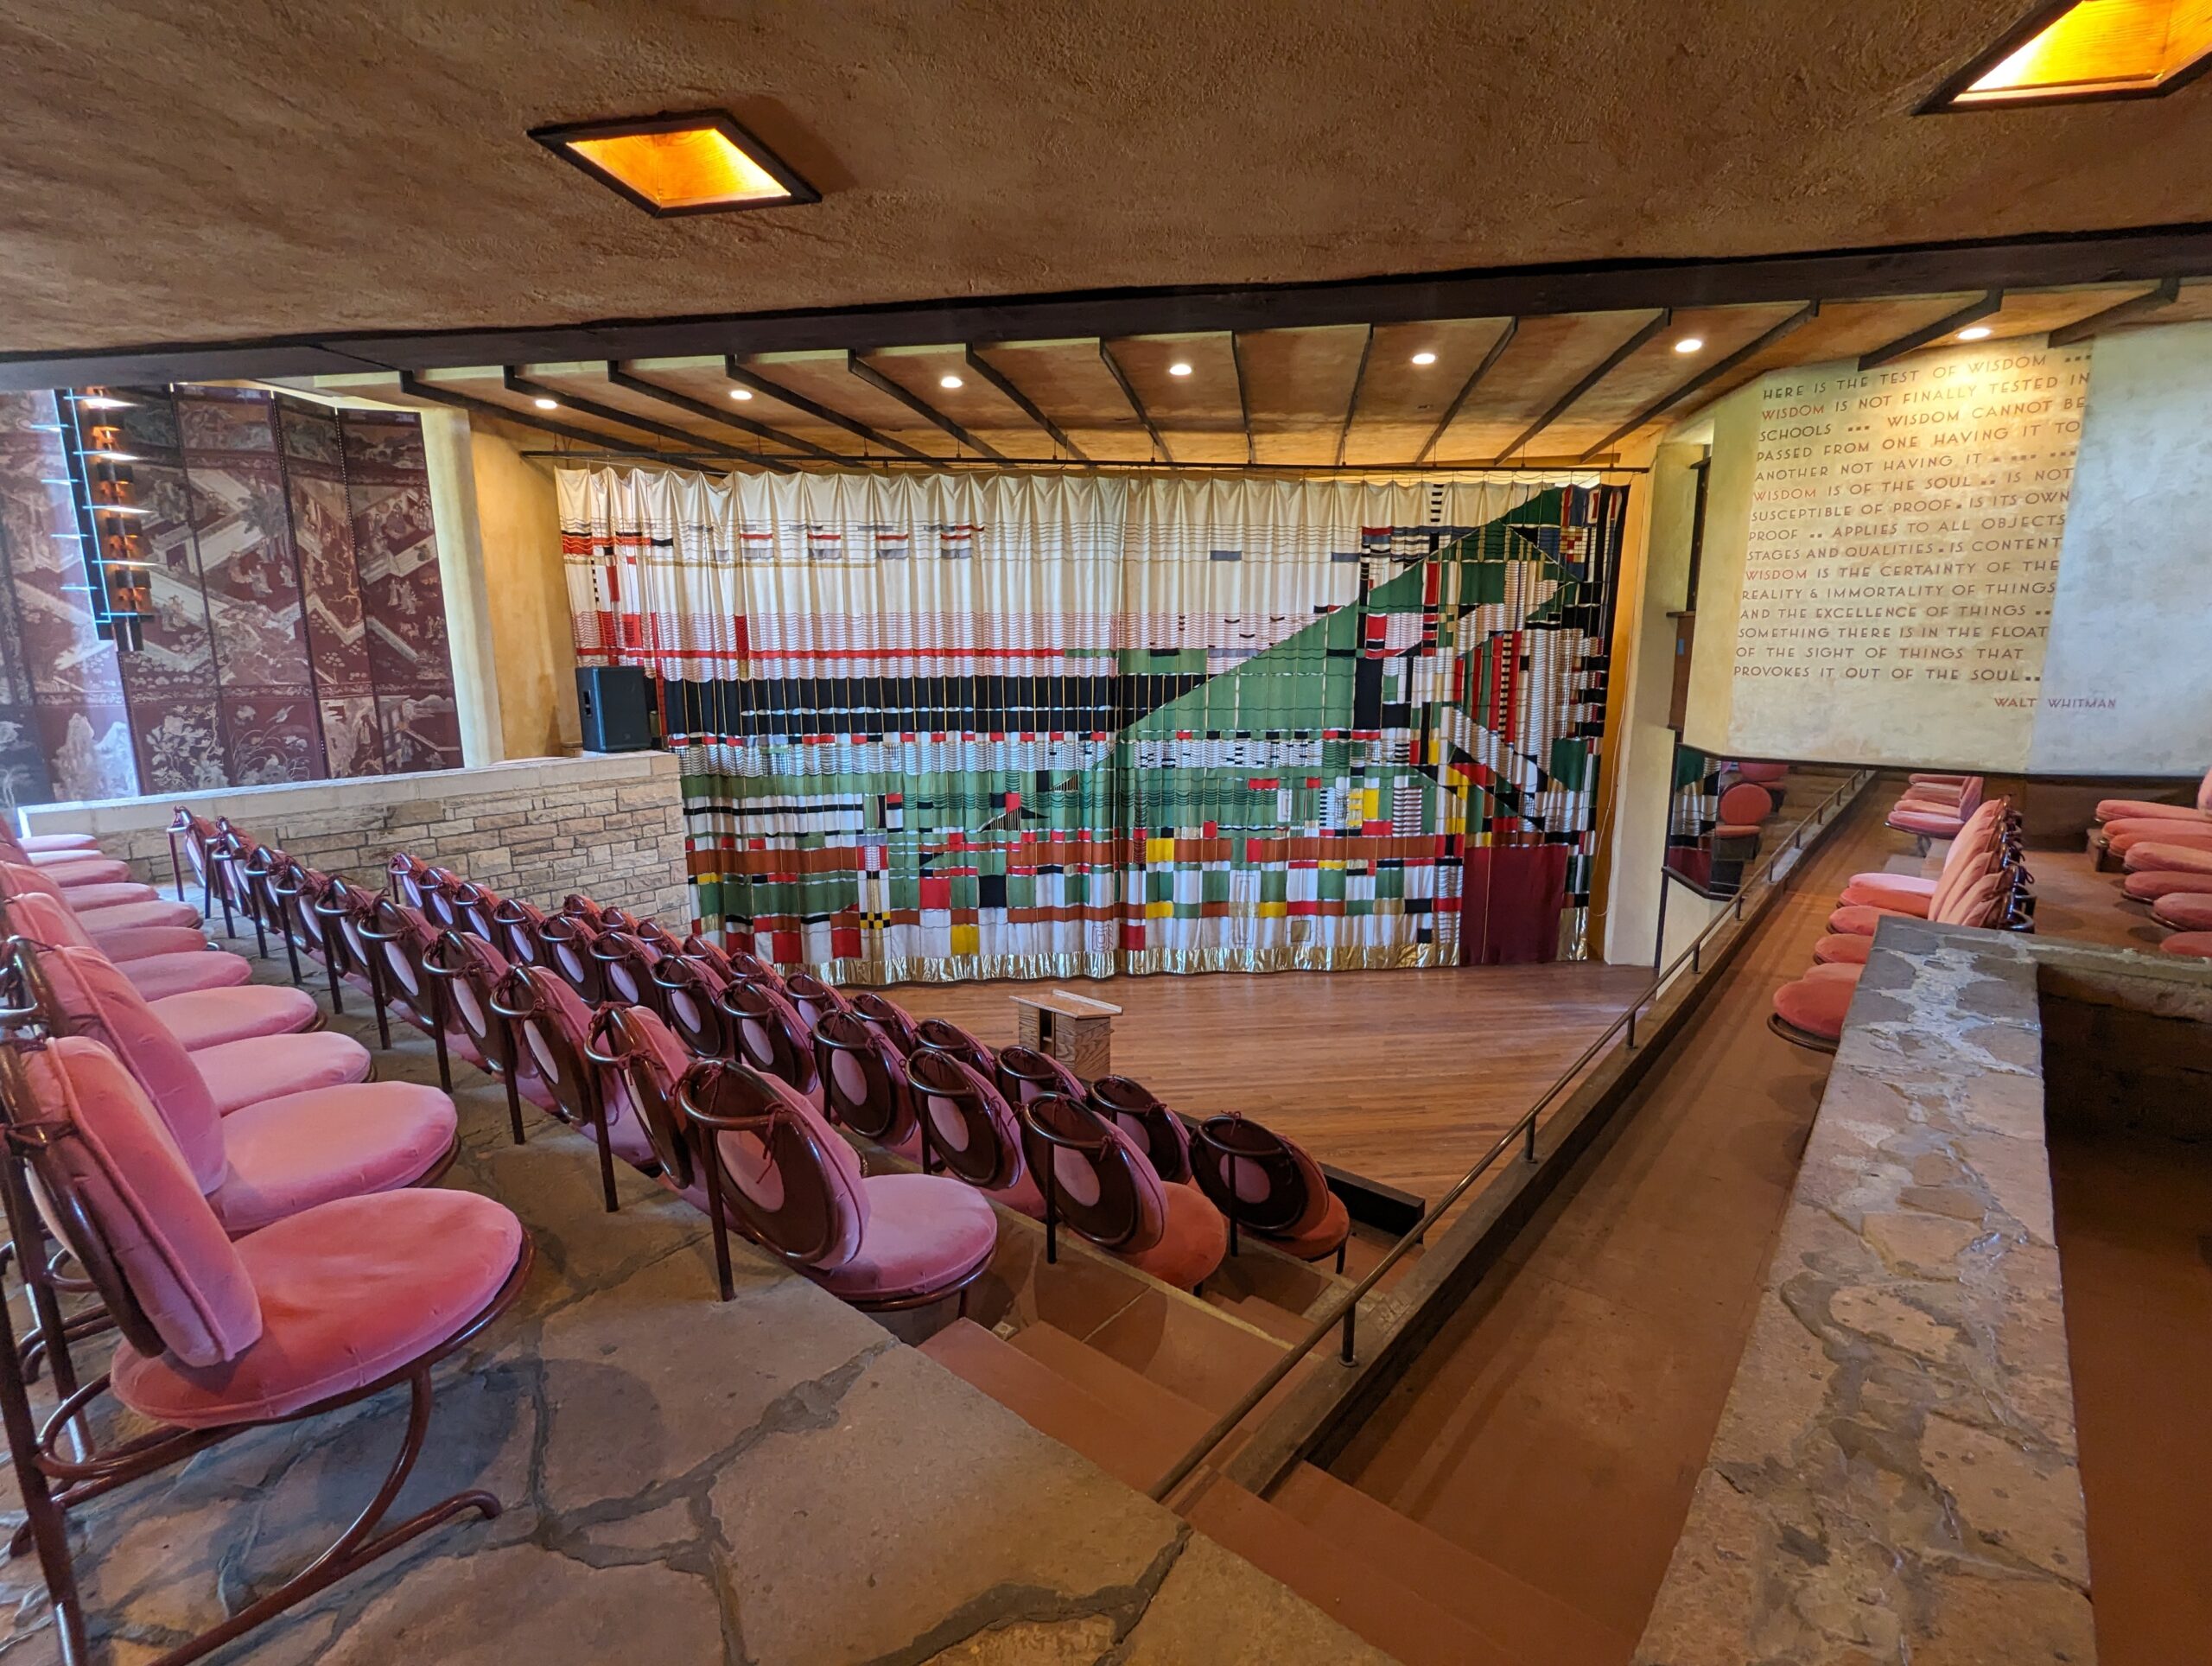 The newly renovated theater space at the Taliesin compound features a colorful, well-known curtain